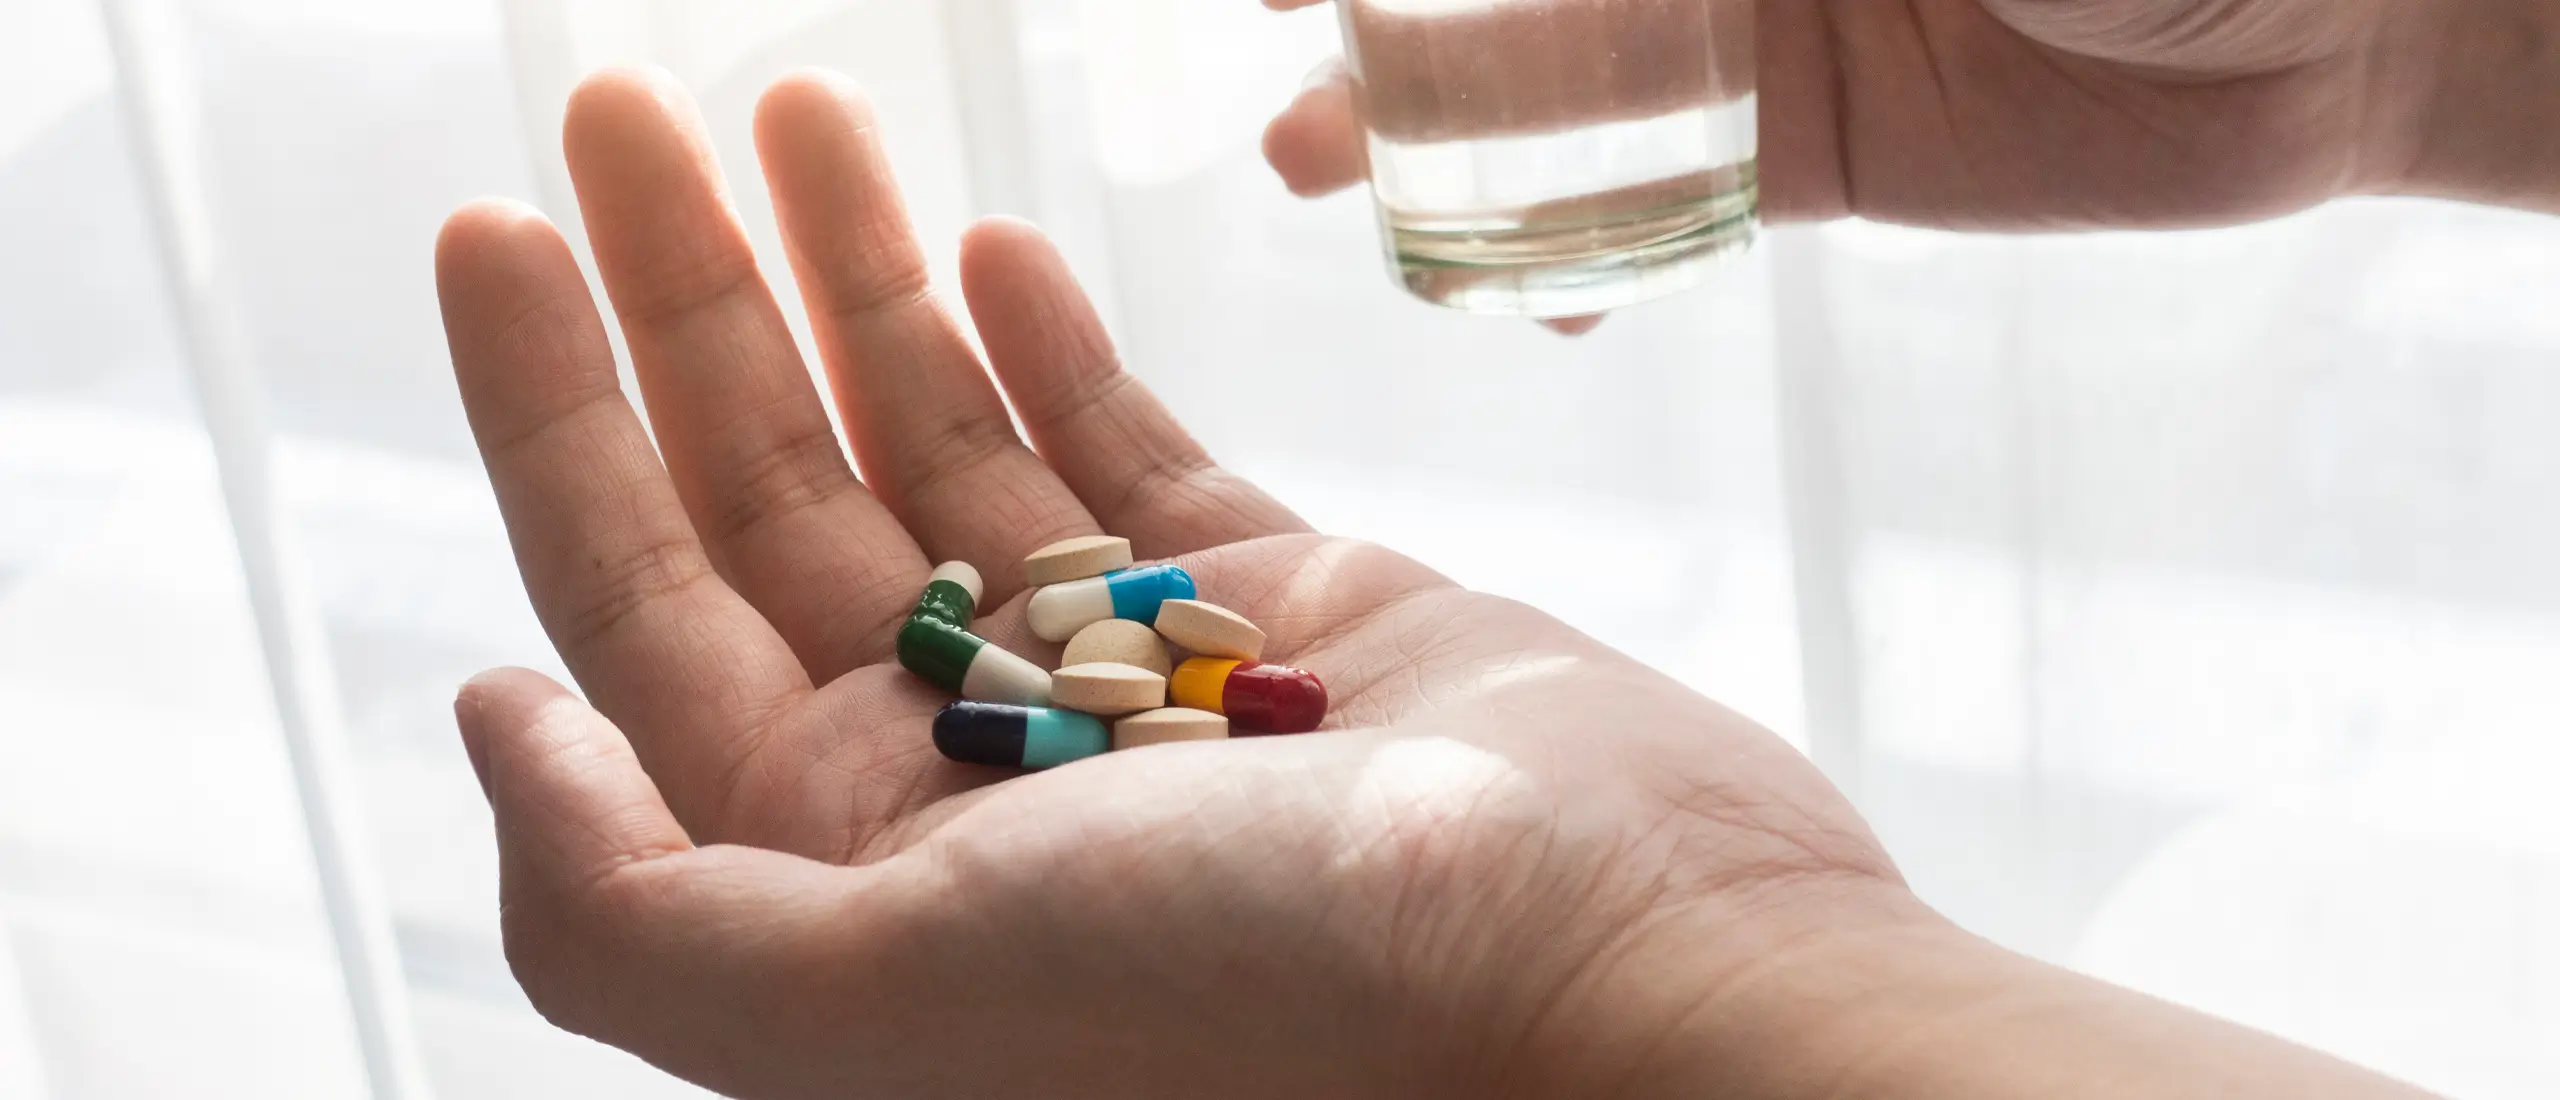 person holds out hand with an array of colorful pills. The other hand holds a glass of water